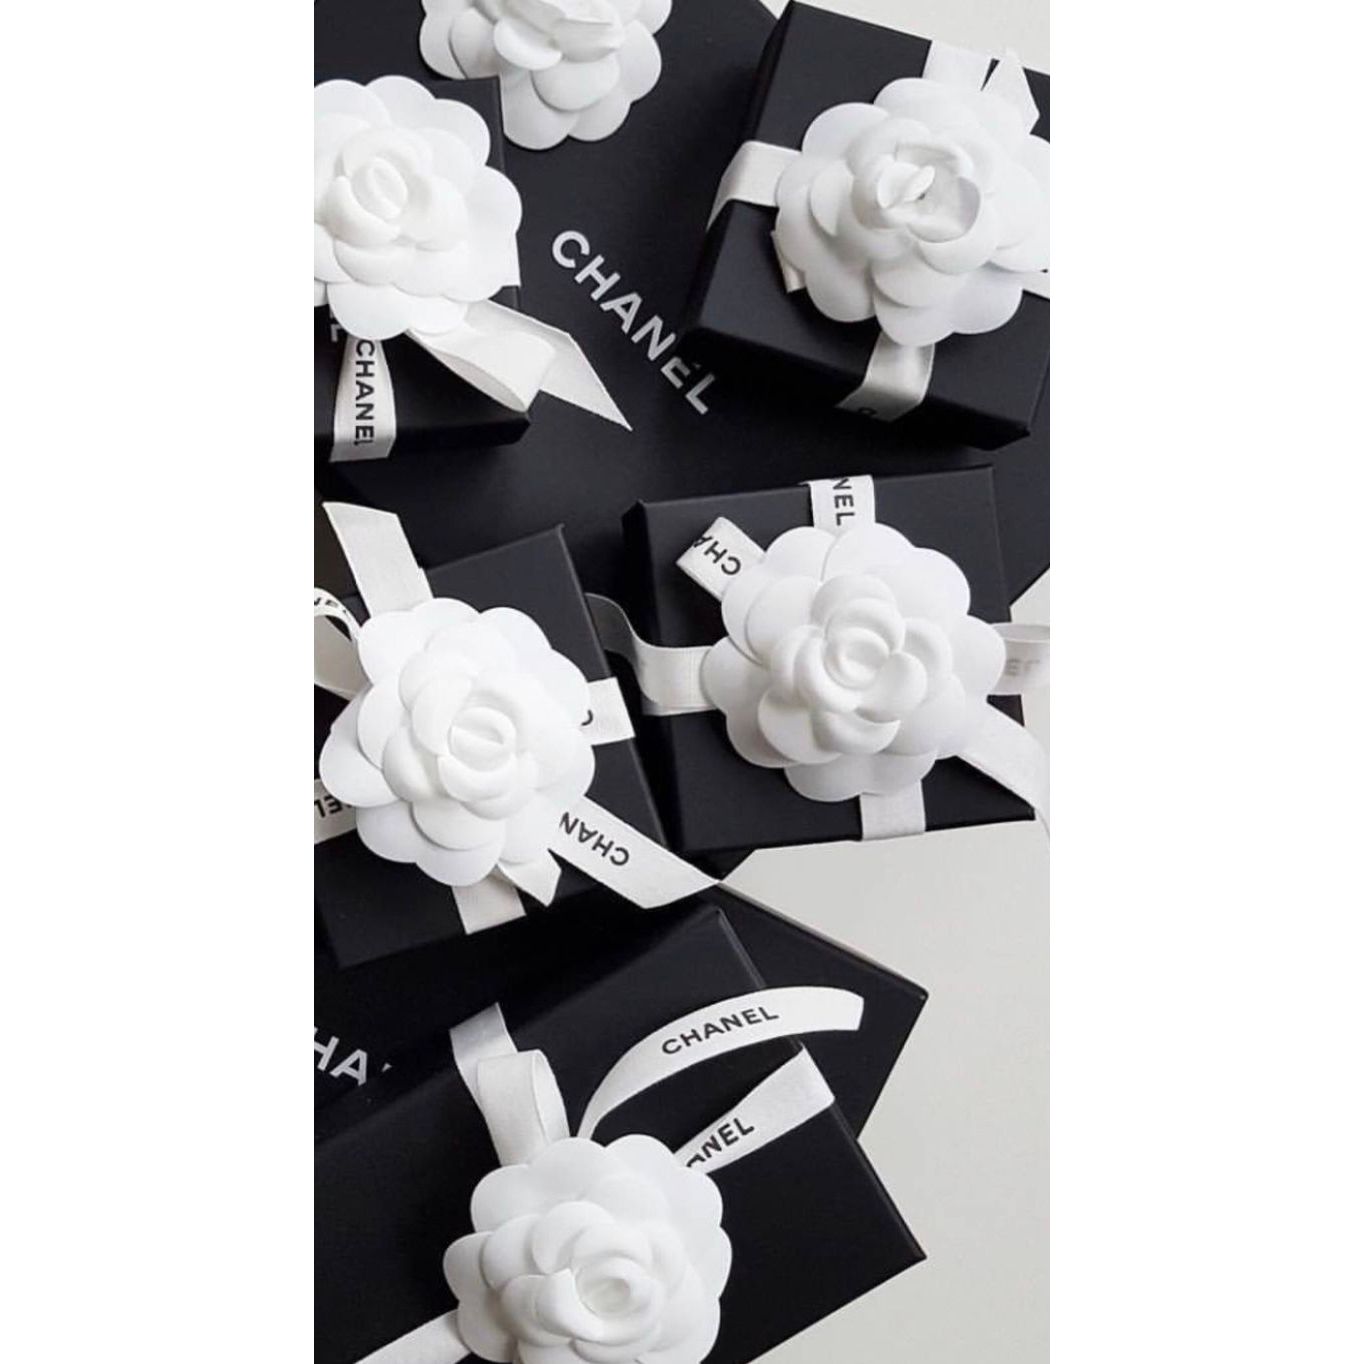 Chanel gift wrapping